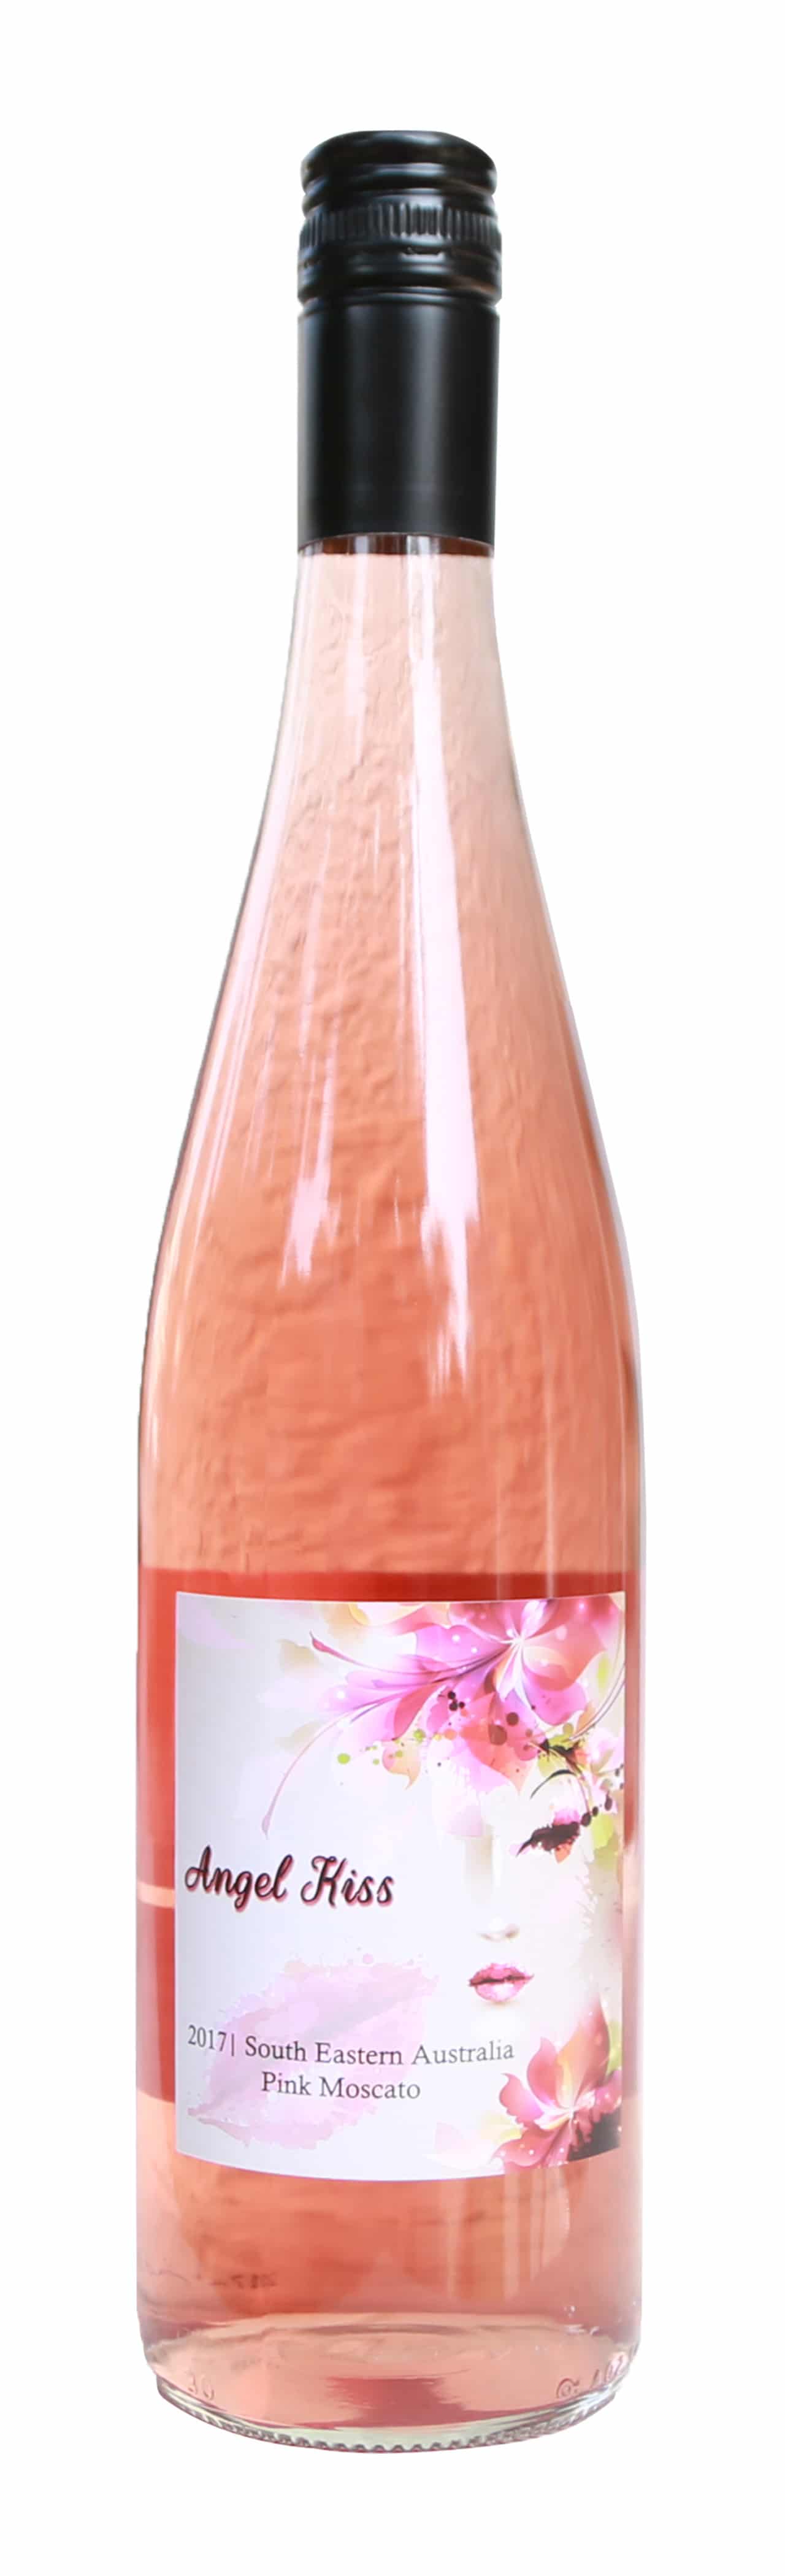 Angel Kiss Pink Moscato